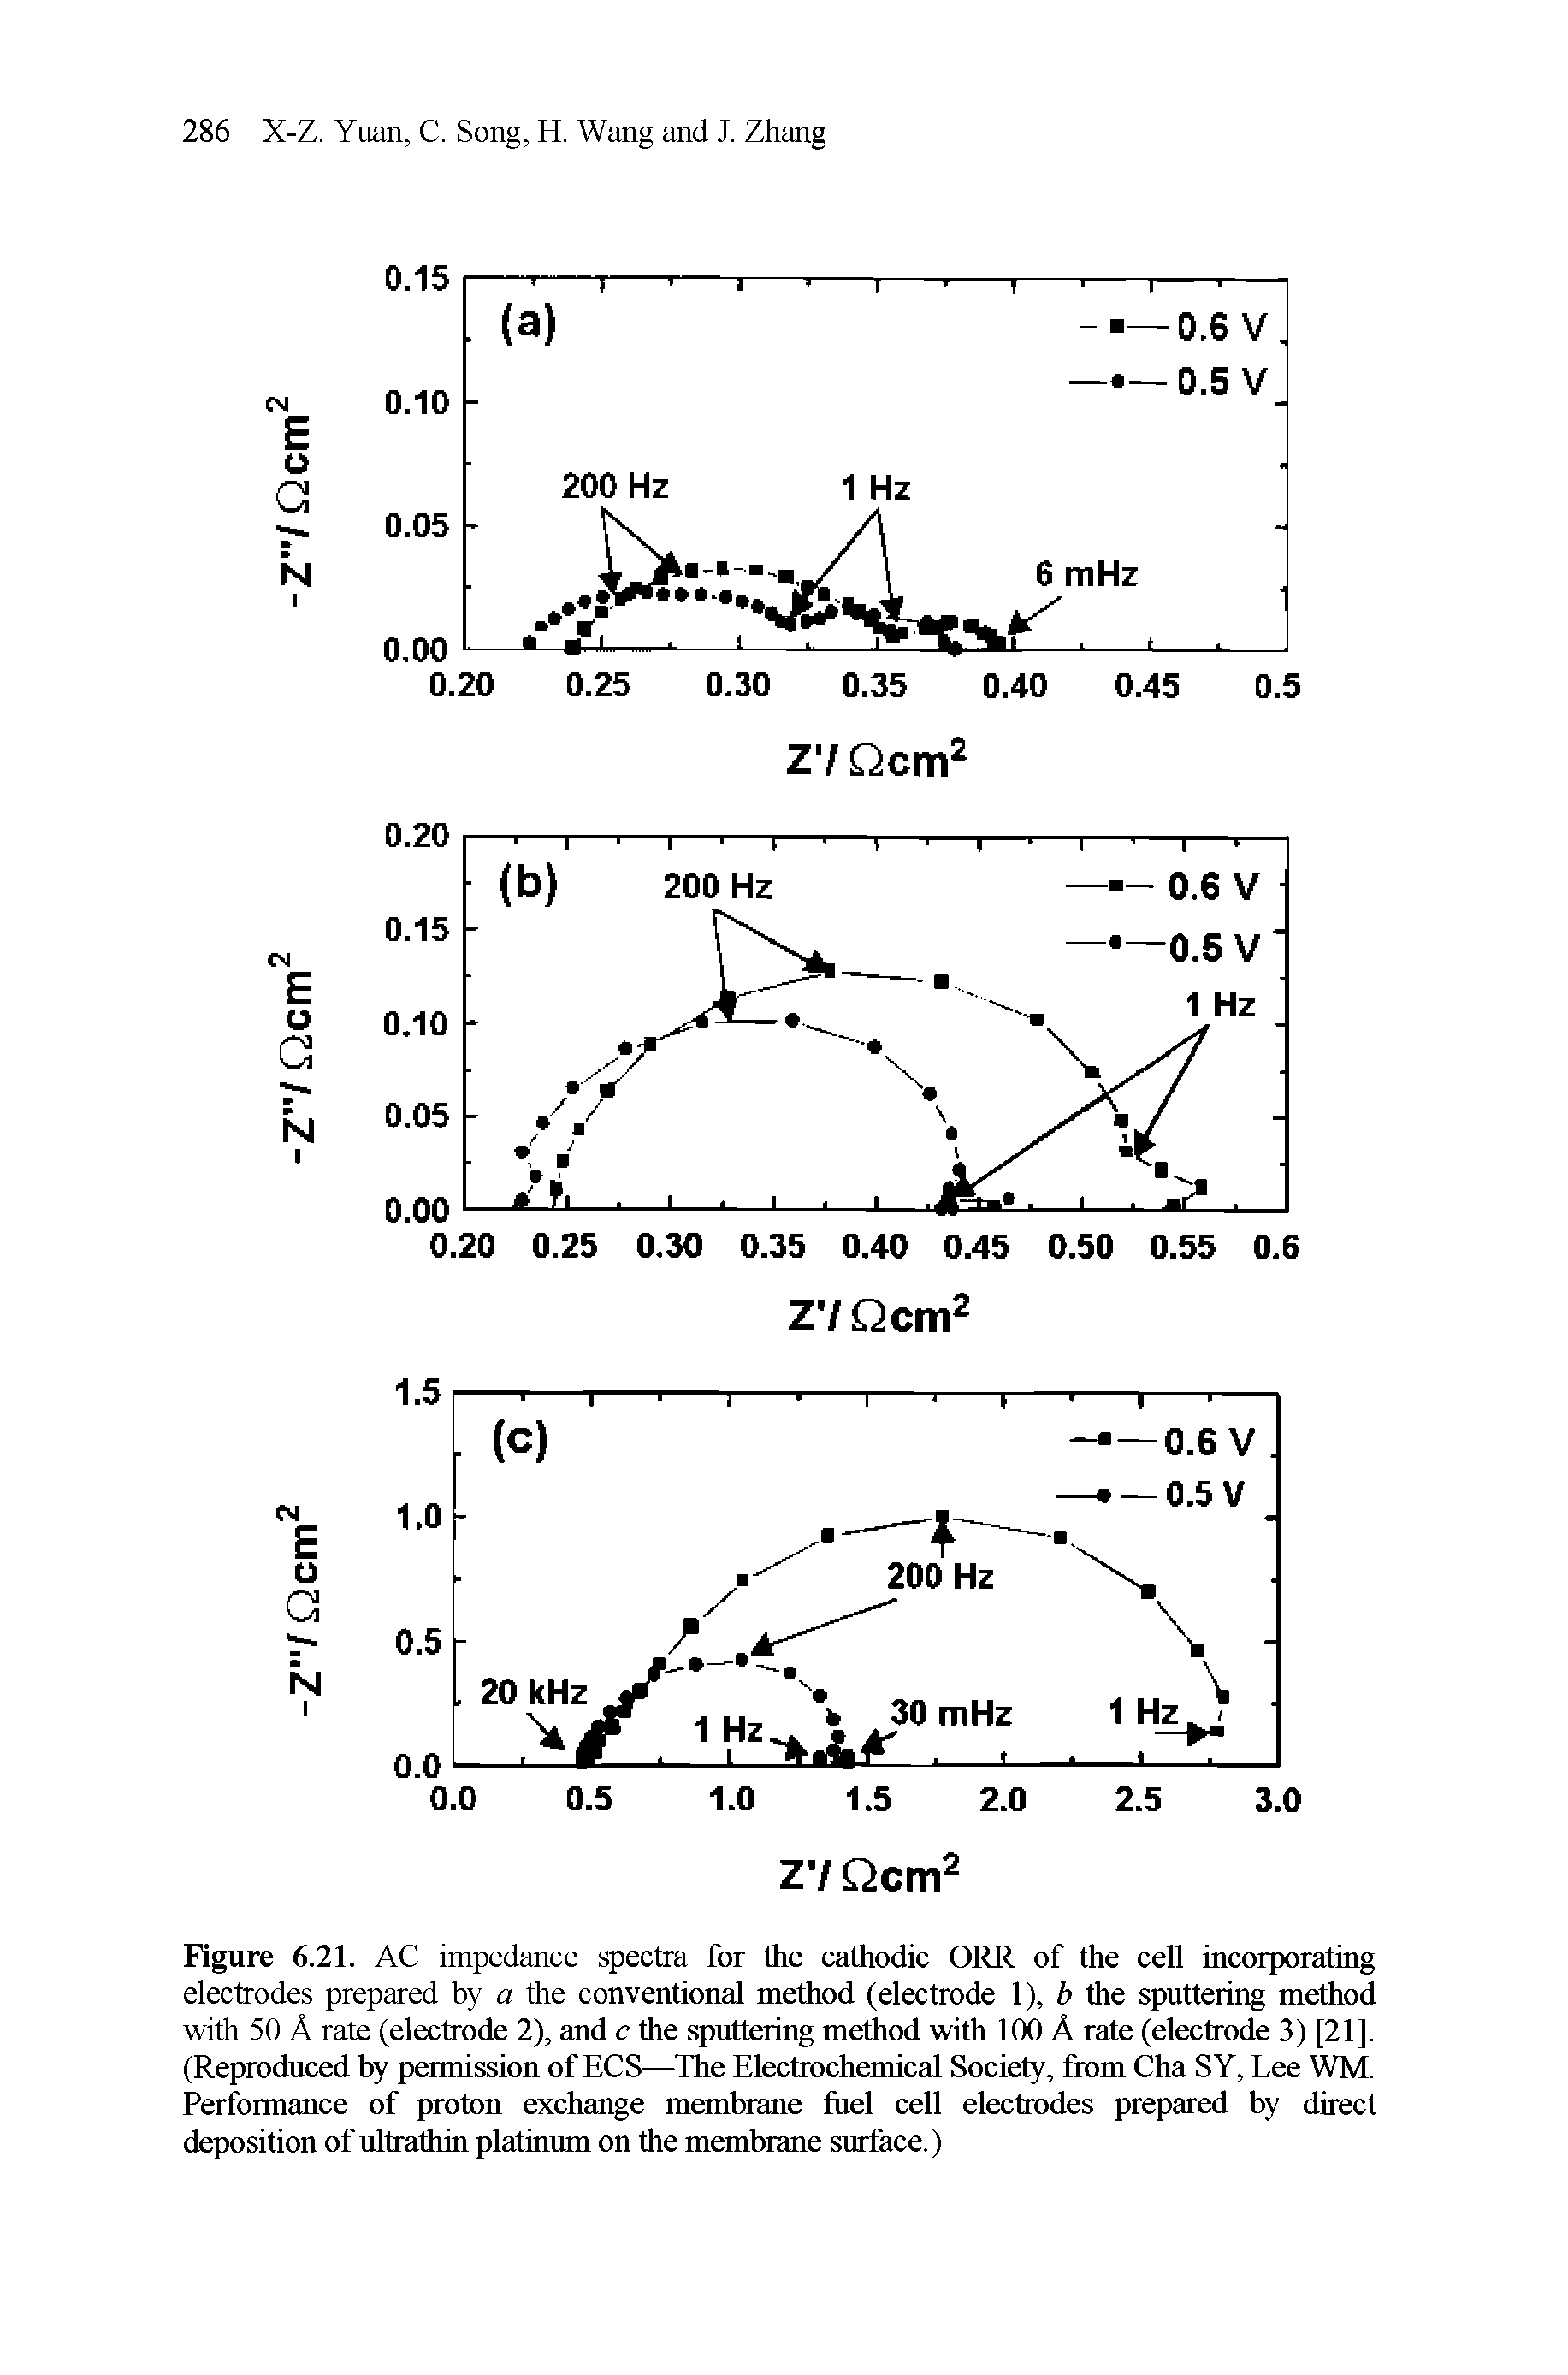 Figure 6.21. AC impedance spectra for the cathodic ORR of the cell incorporating electrodes prepared by a the conventional method (electrode 1), b the sputtering method with 50 A rate (electrode 2), and c the sputtering method with 100 A rate (electrode 3) [21]. (Reproduced by permission of ECS—The Electrochemical Society, from Cha SY, Lee WM. Performance of proton exchange membrane fuel cell electrodes prepared by direct deposition of ultrathin platinum on the membrane surface.)...